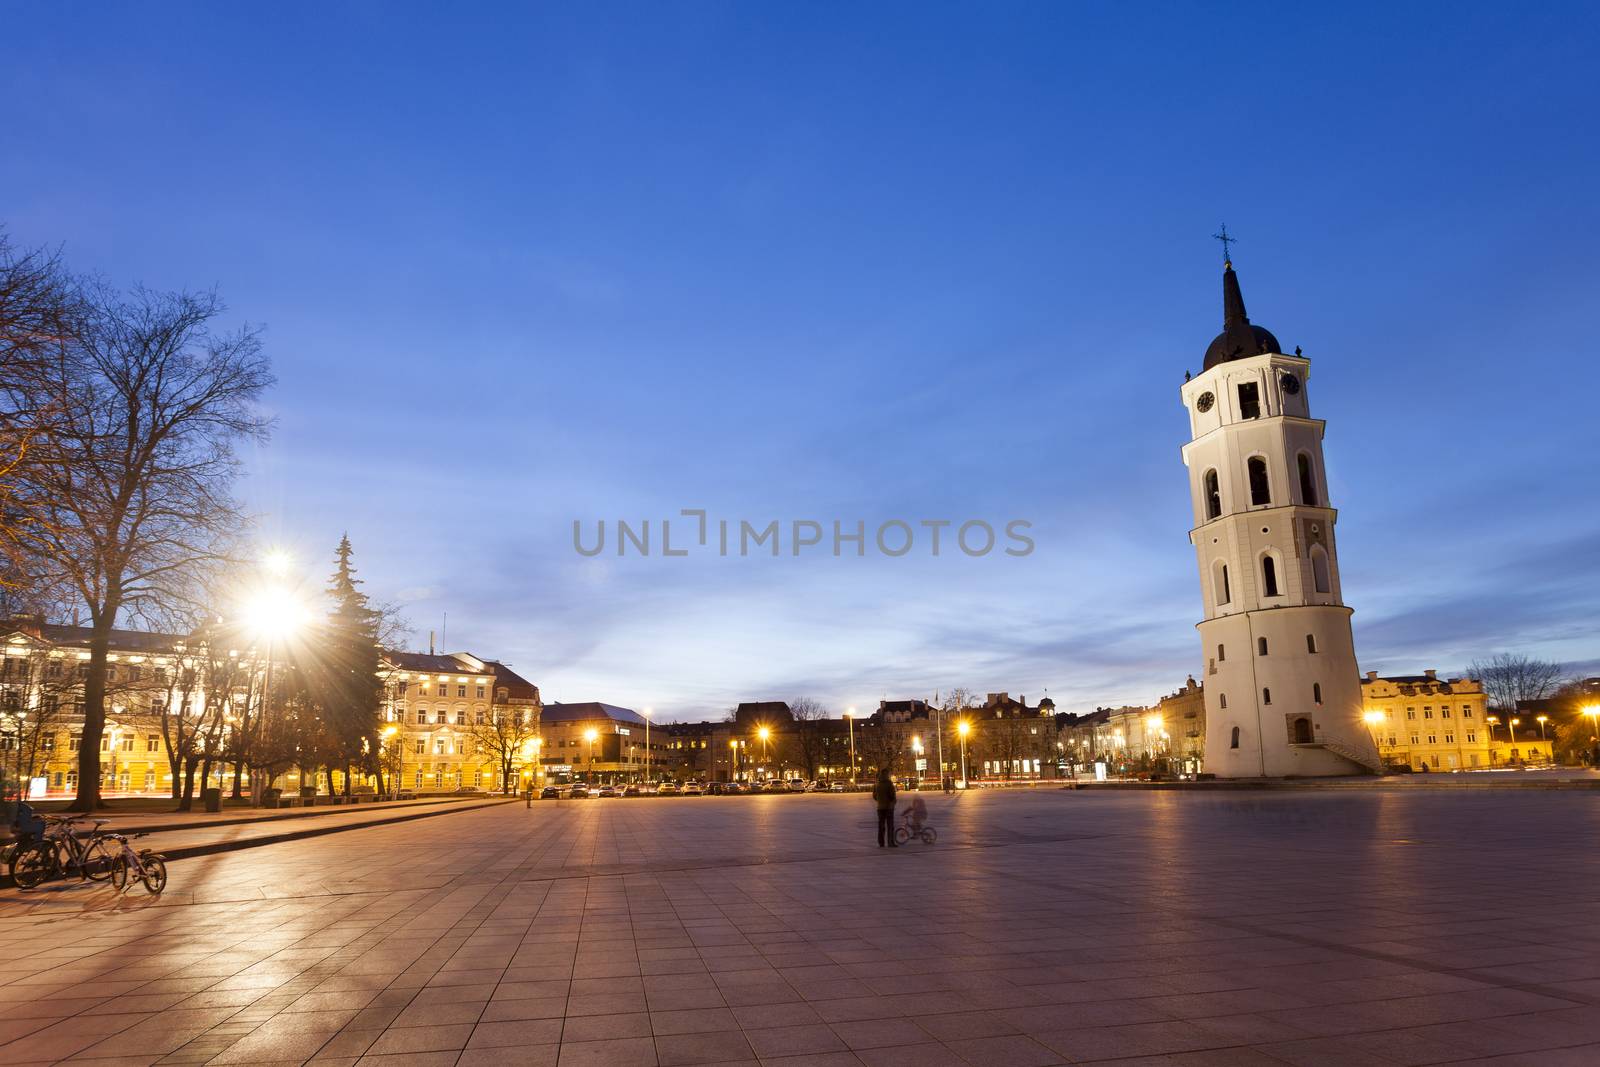 The Cathedral Square in central Vilnius by ints